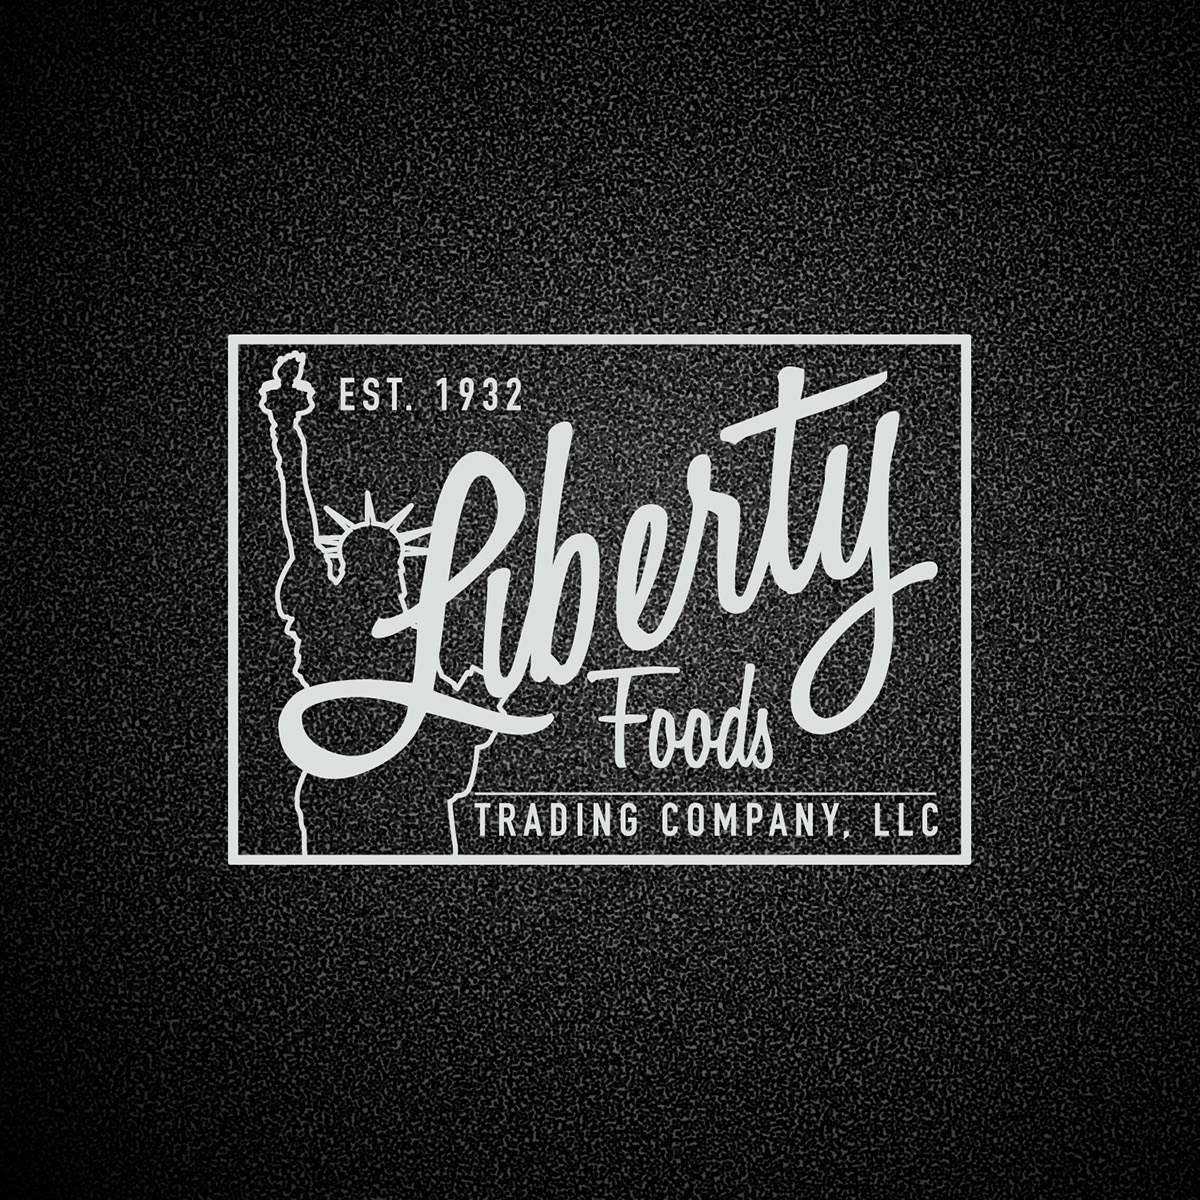 logo Liberty vintage Fruit Pacific Coast Producers statue of liberty crate labels vintage style retro style